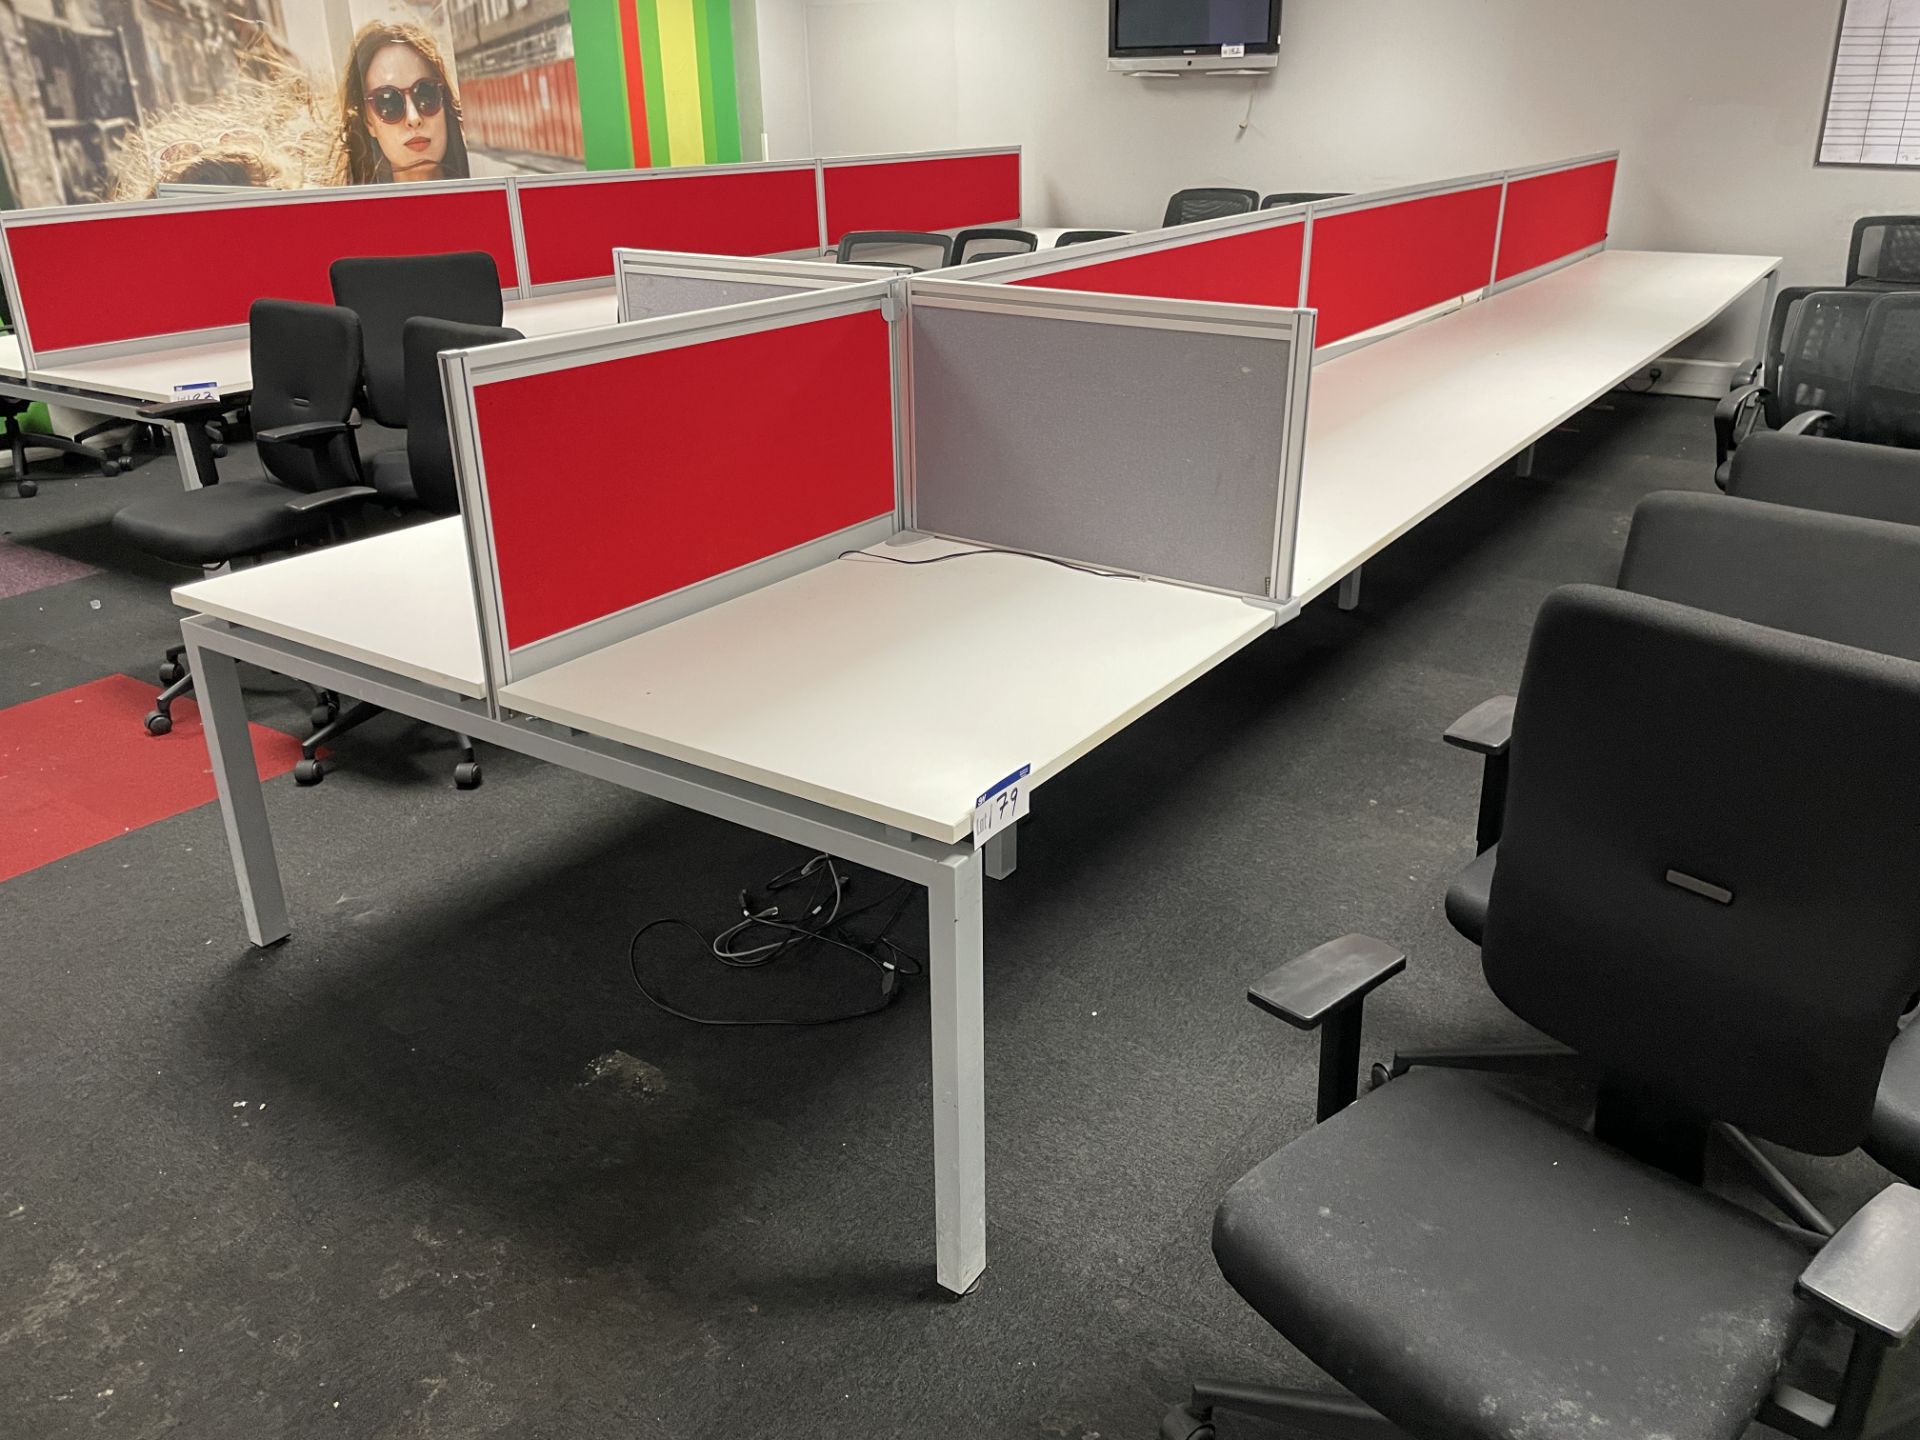 Steel Framed Double Sided Desk Unit, approx. 7m x 1.65m wide Please read the following important